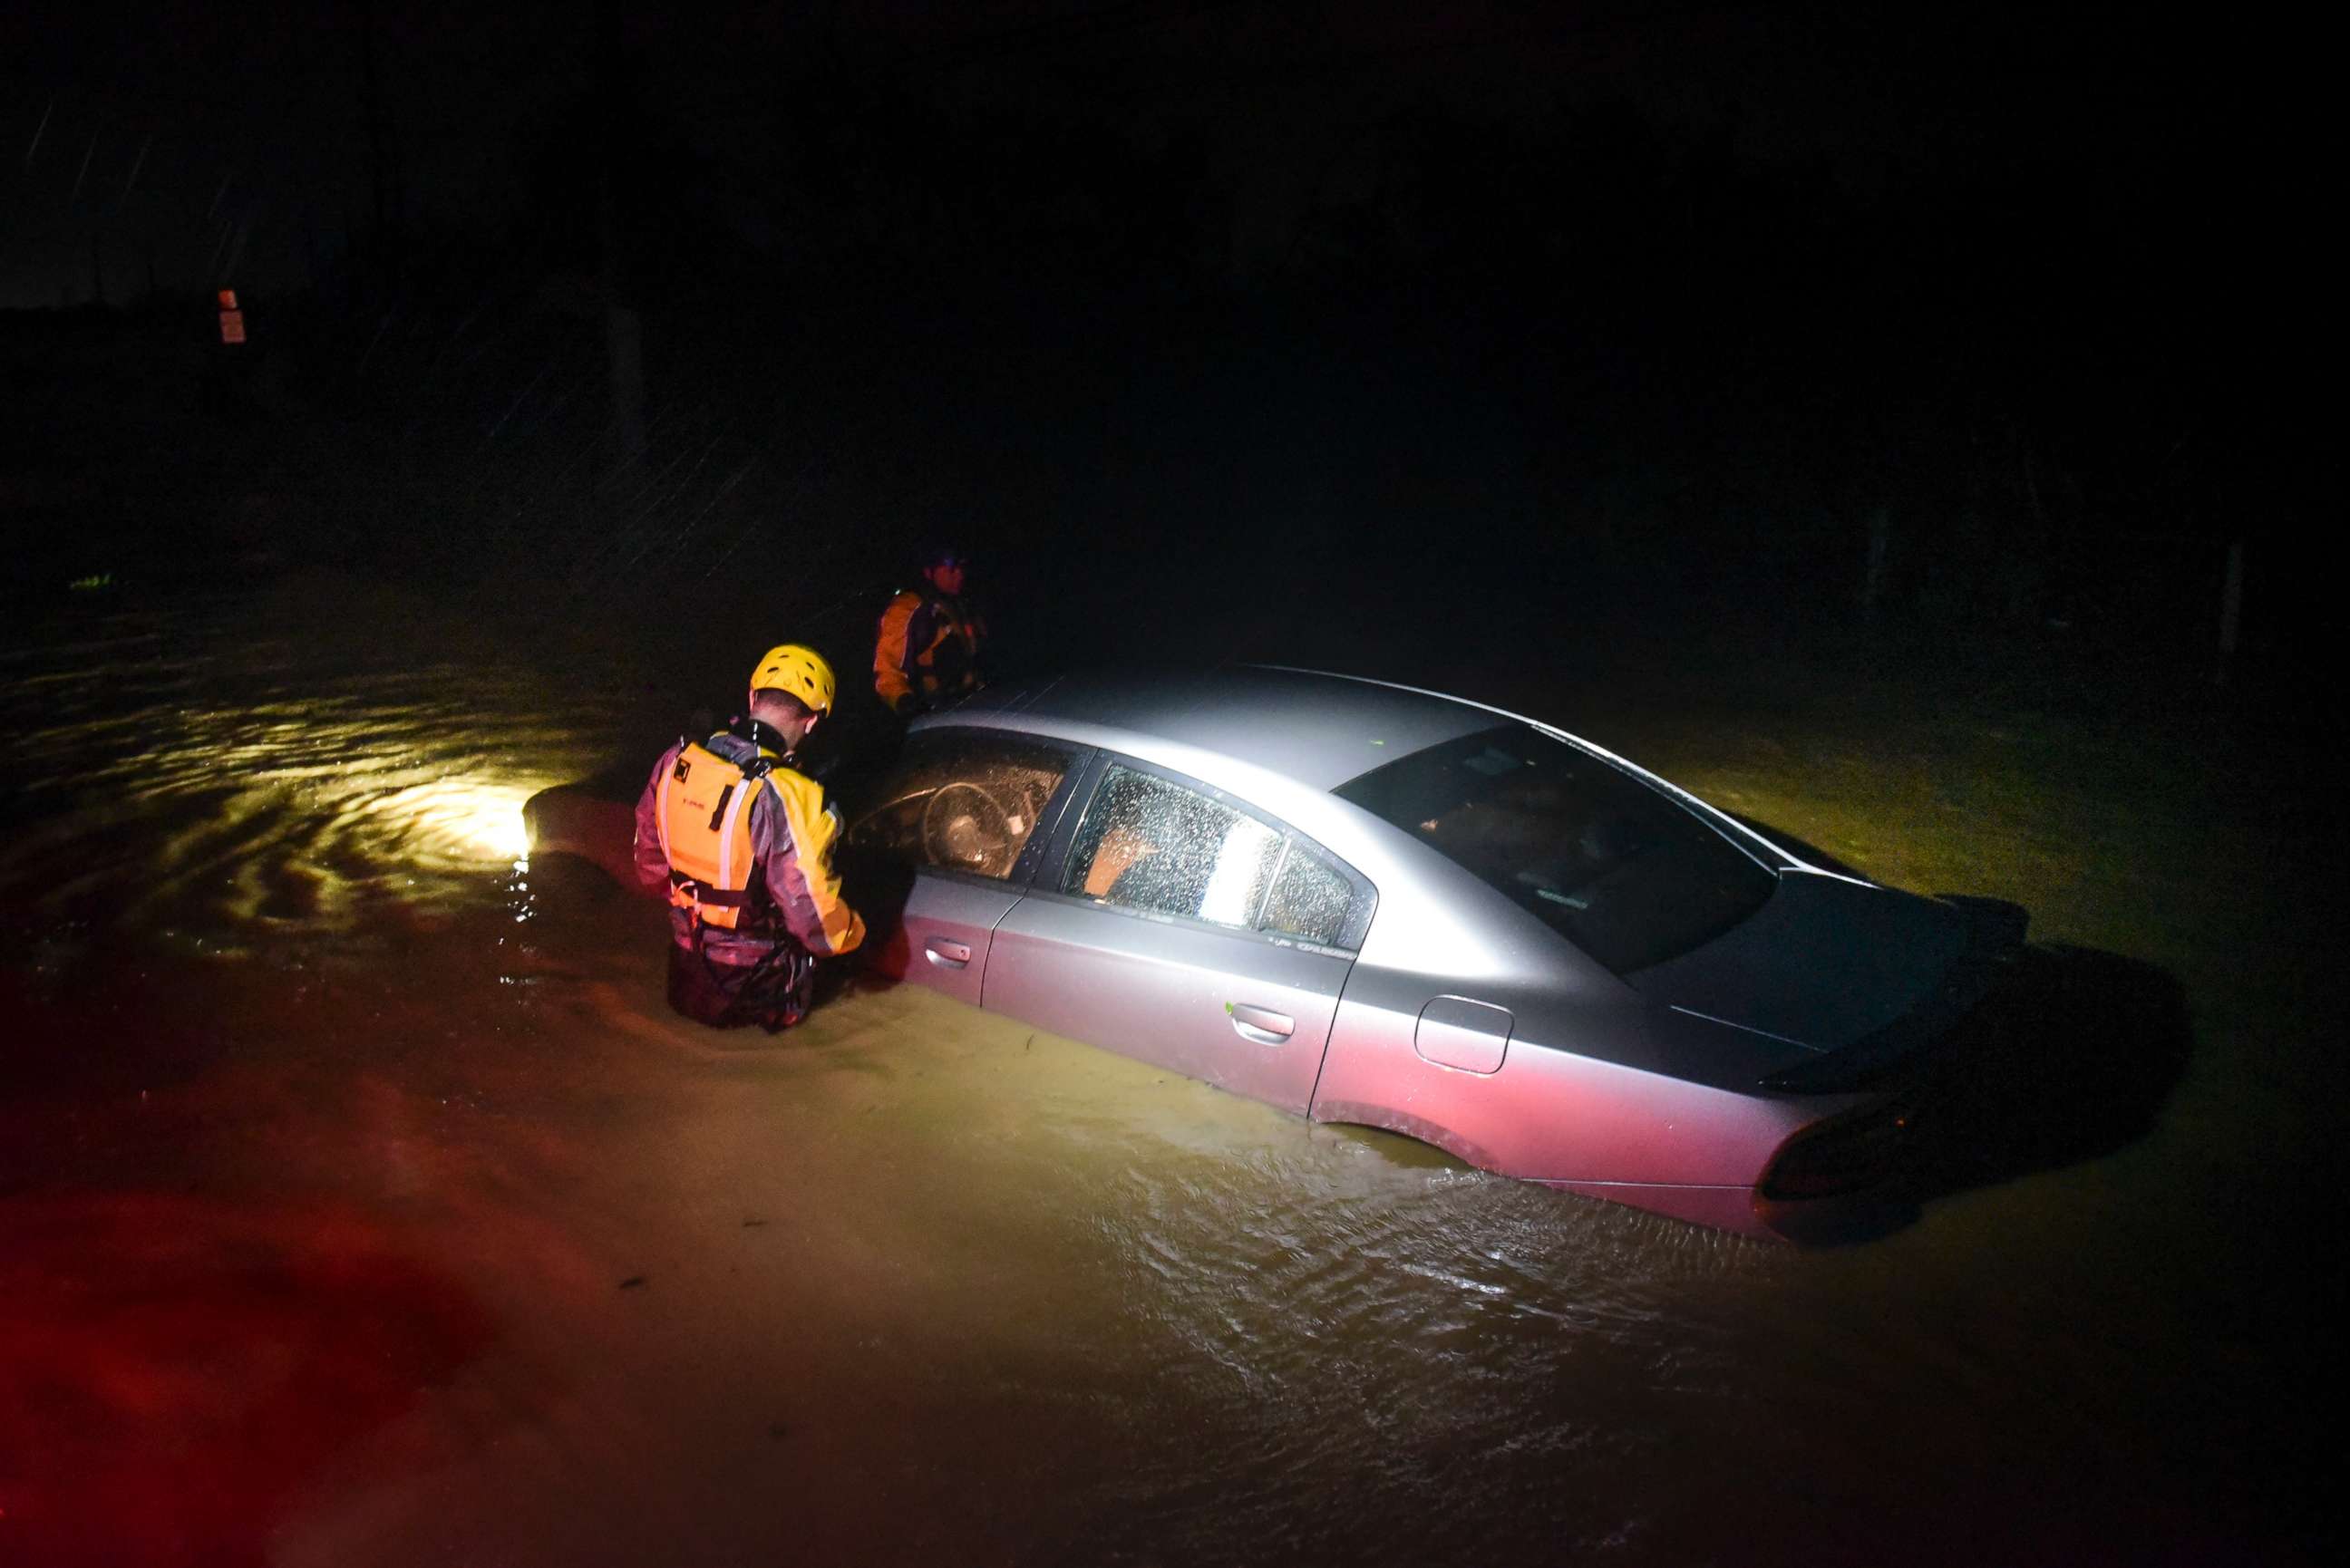 PHOTO: Rescue staff from the Municipal Emergency Management Agency investigate an empty flooded car during the passage of Hurricane Irma through the northeastern part of the island in Fajardo, Puerto Rico, Sept. 6, 2017.